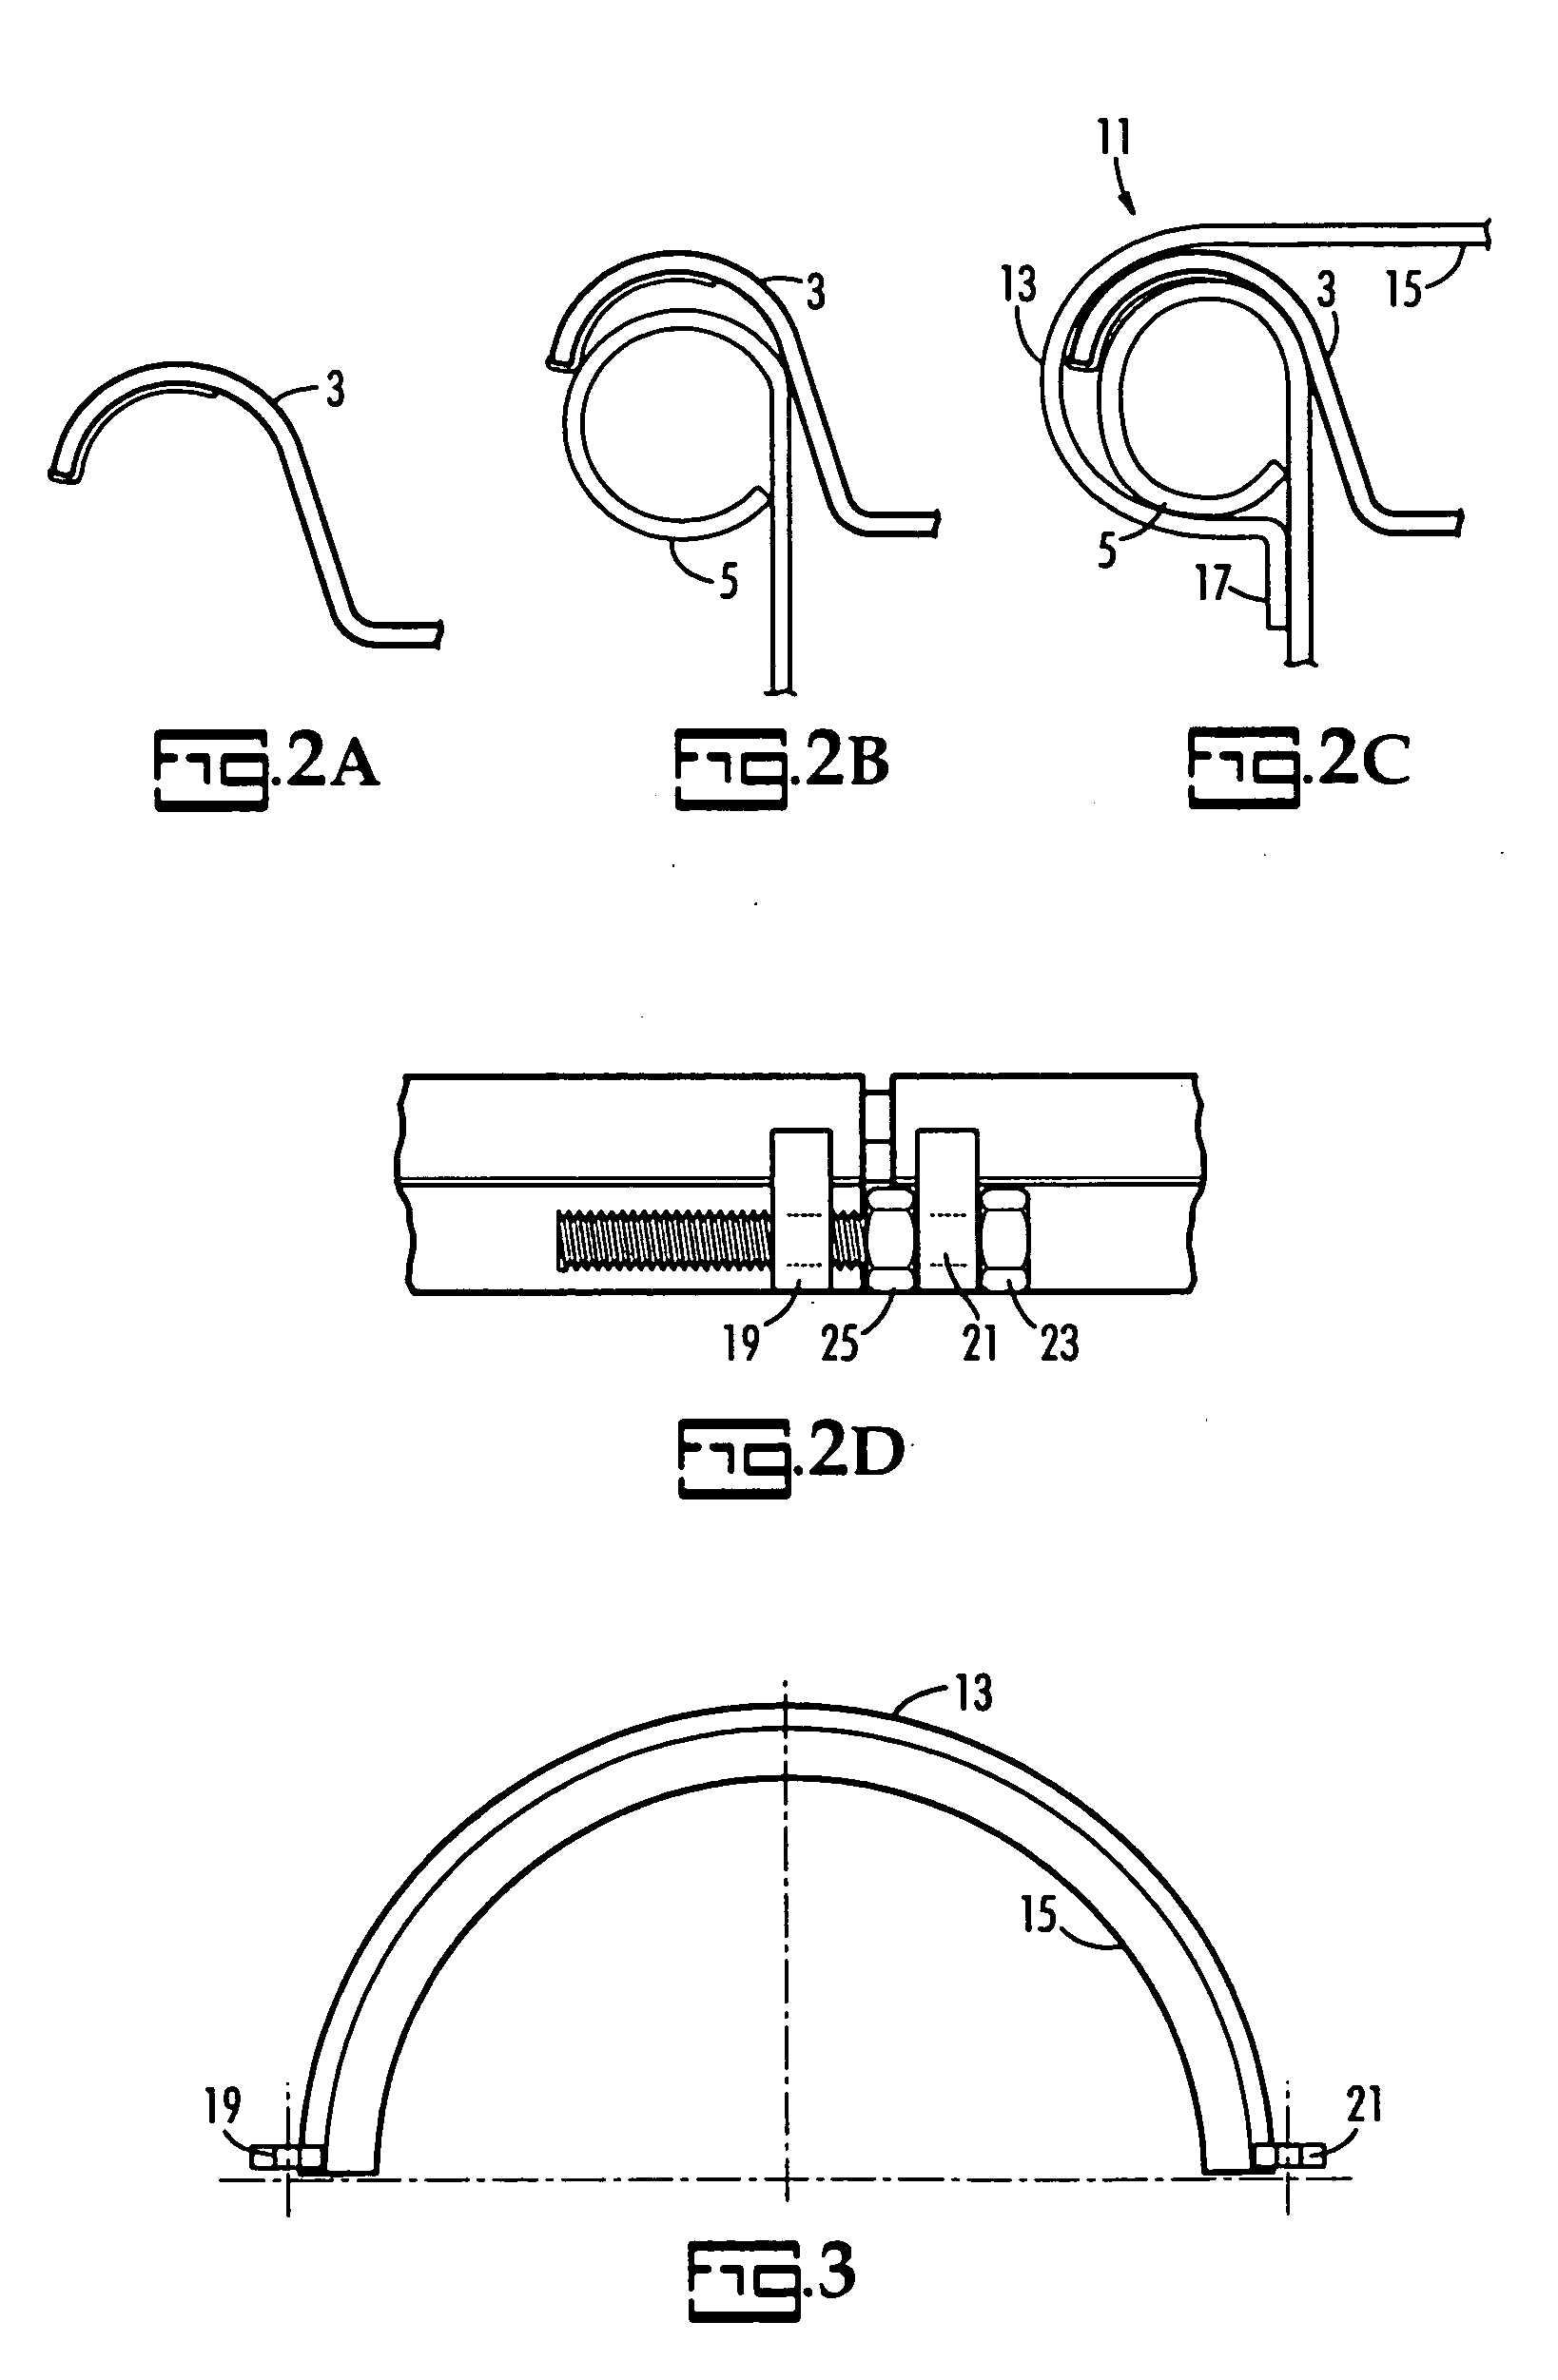 Clamshell closure for metal drum